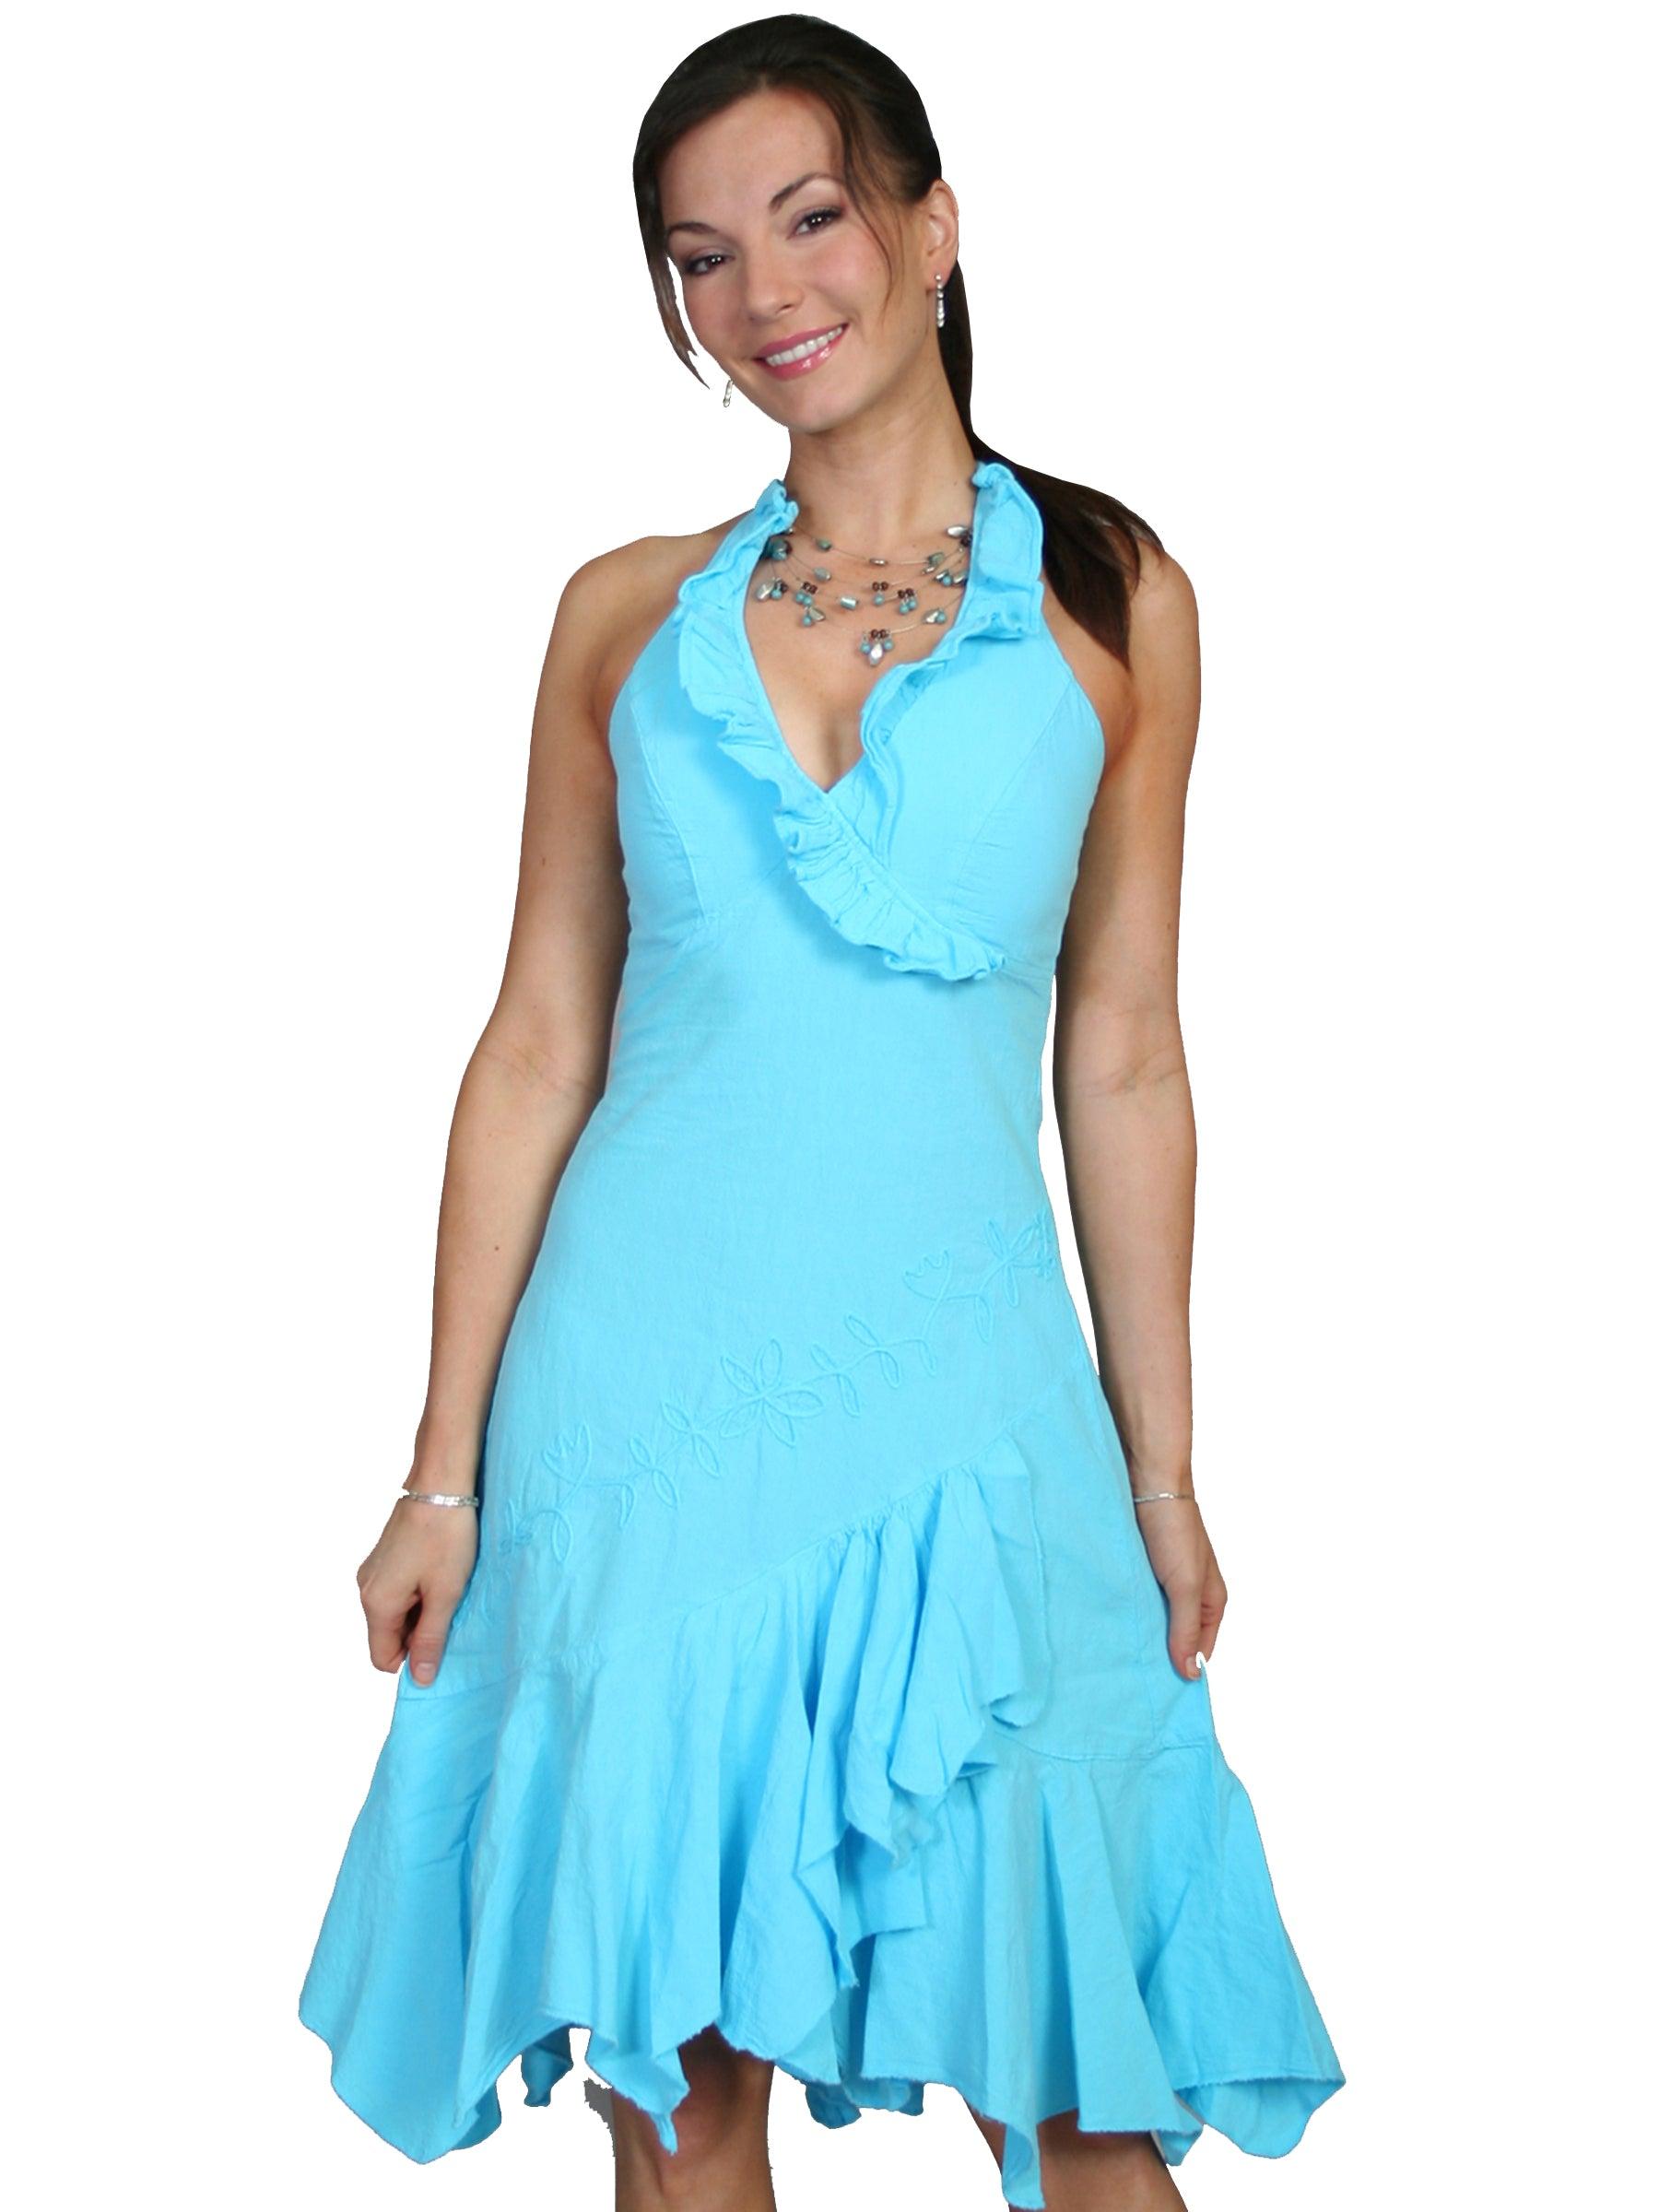 Scully TURQUOISE HALTER DRESS PERUVIAN COTTON - Flyclothing LLC